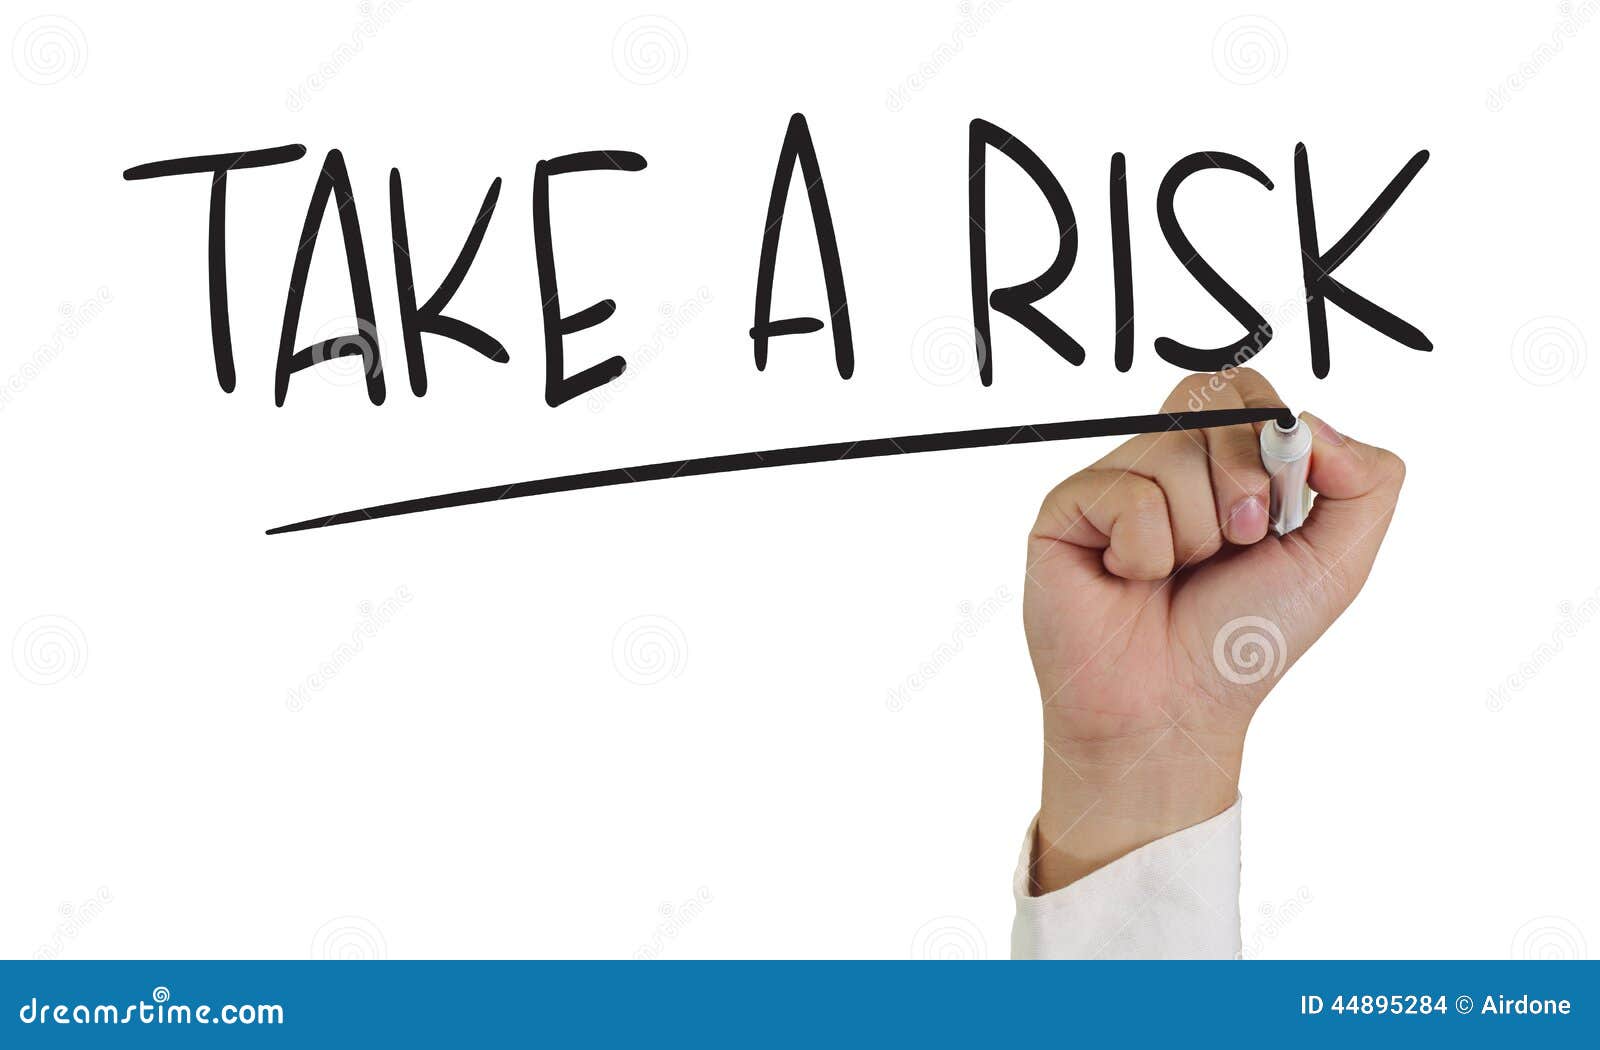 Your business cannot be risk-free